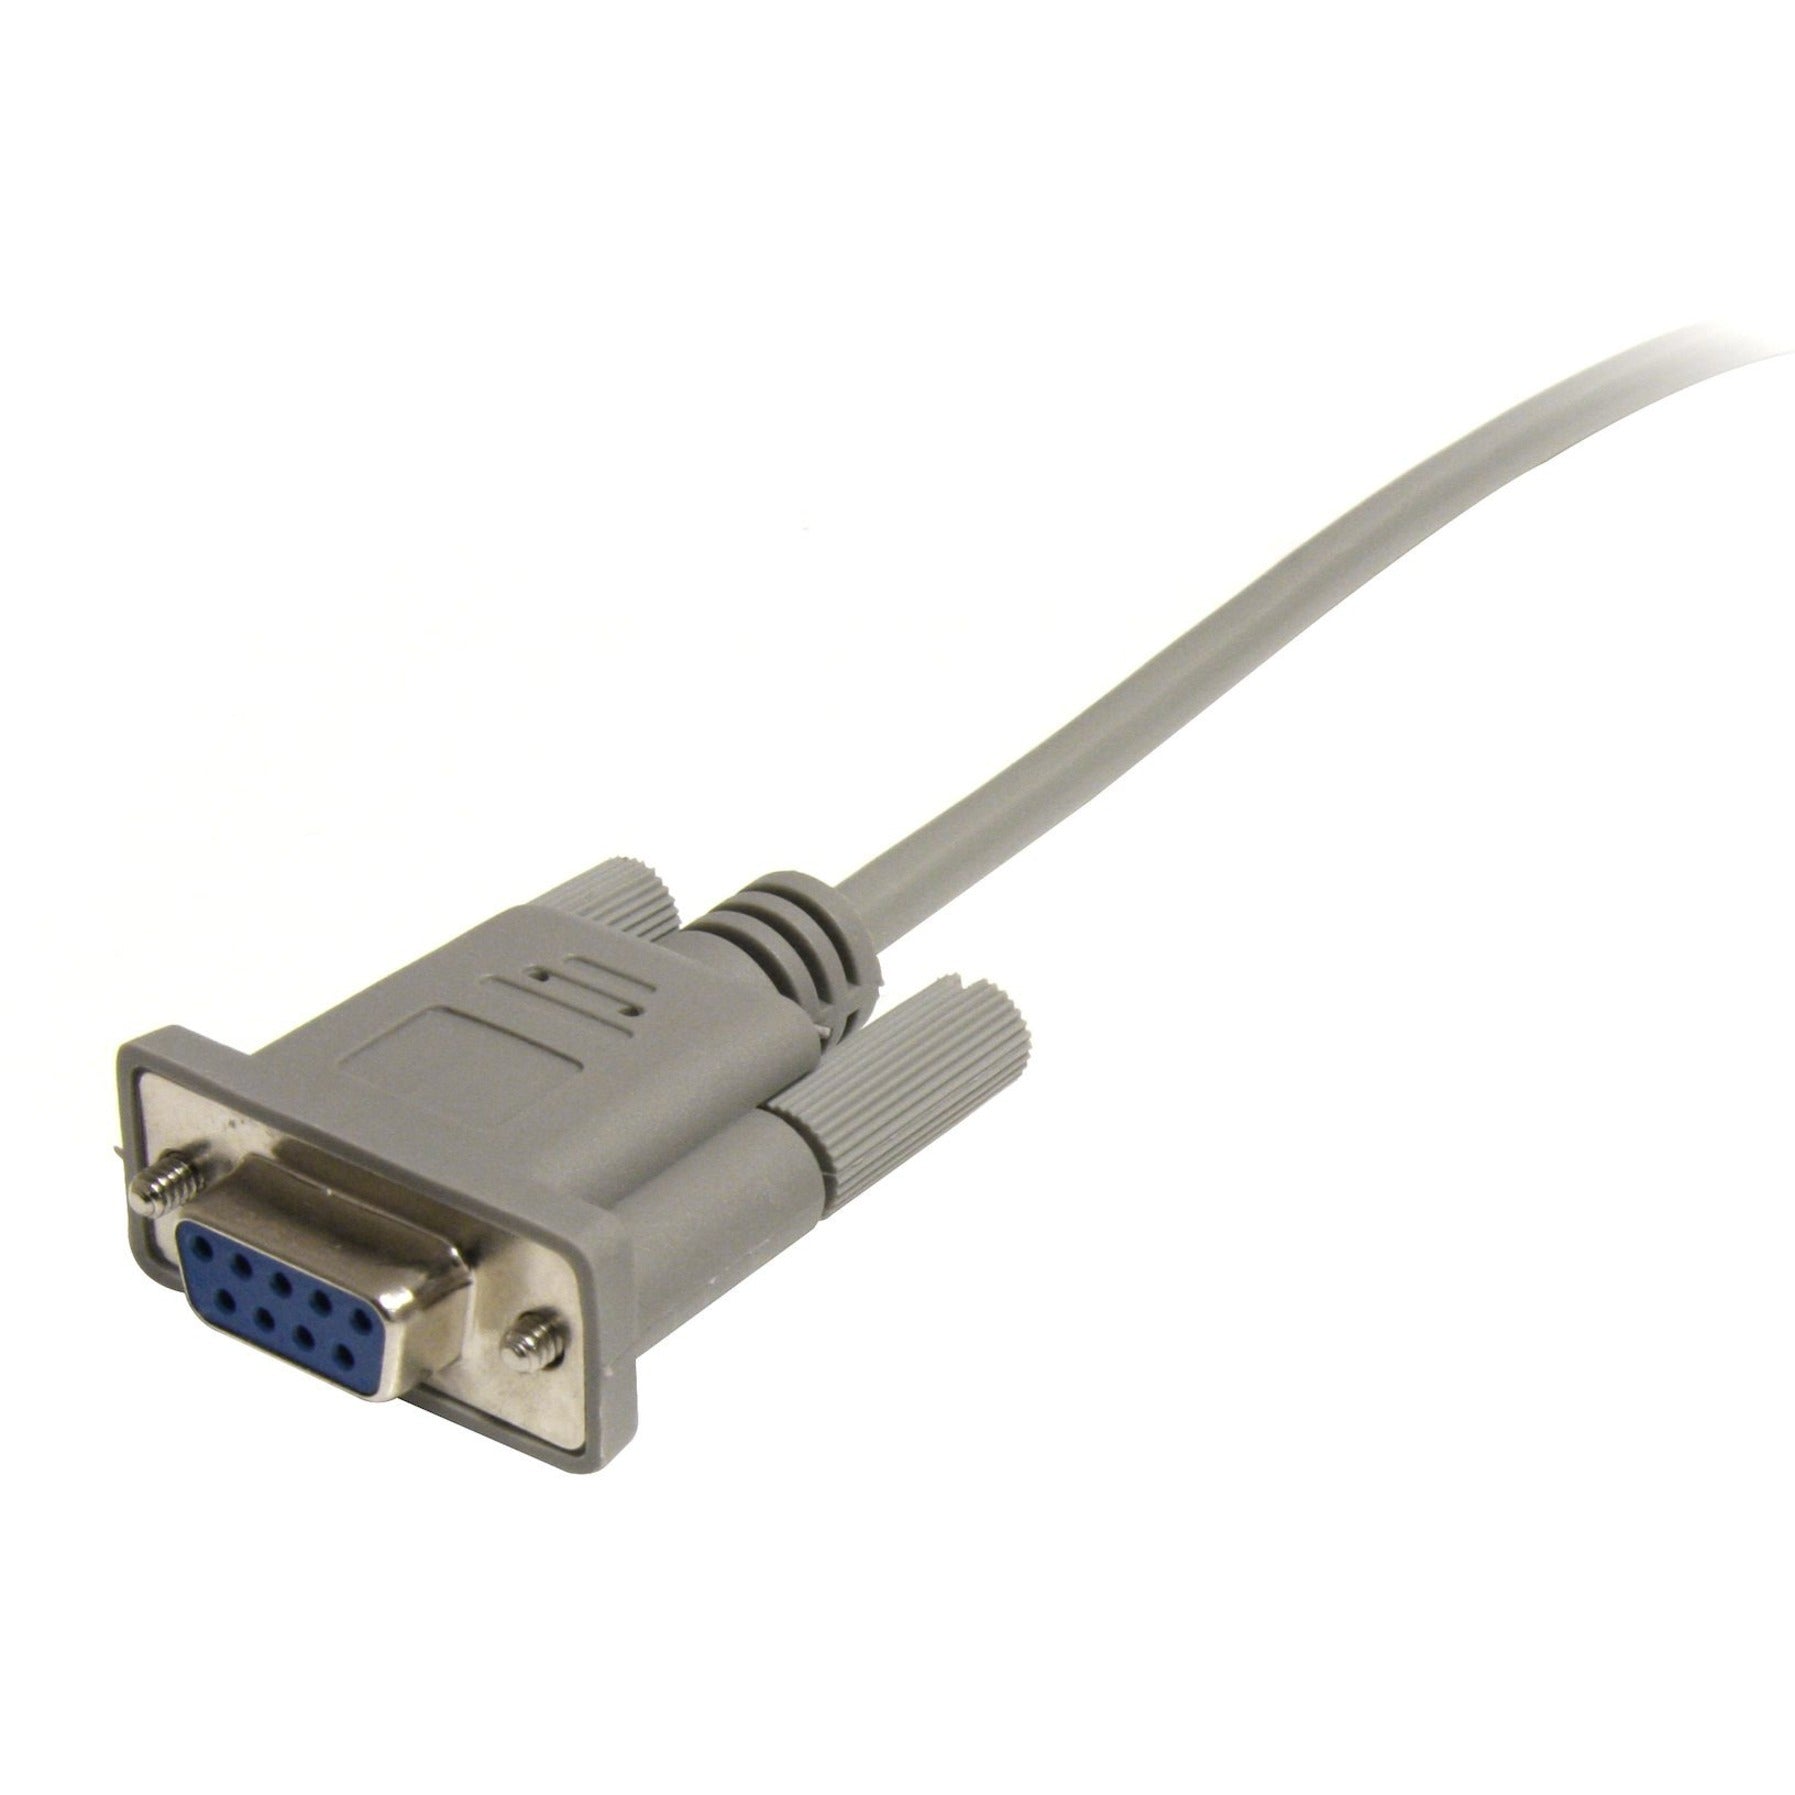 StarTech.com SCNM9FF25 25ft Cross Wired Serial Null Modem Cable, Copper Conductor, Shielded, DB-9 Female to DB-9 Female